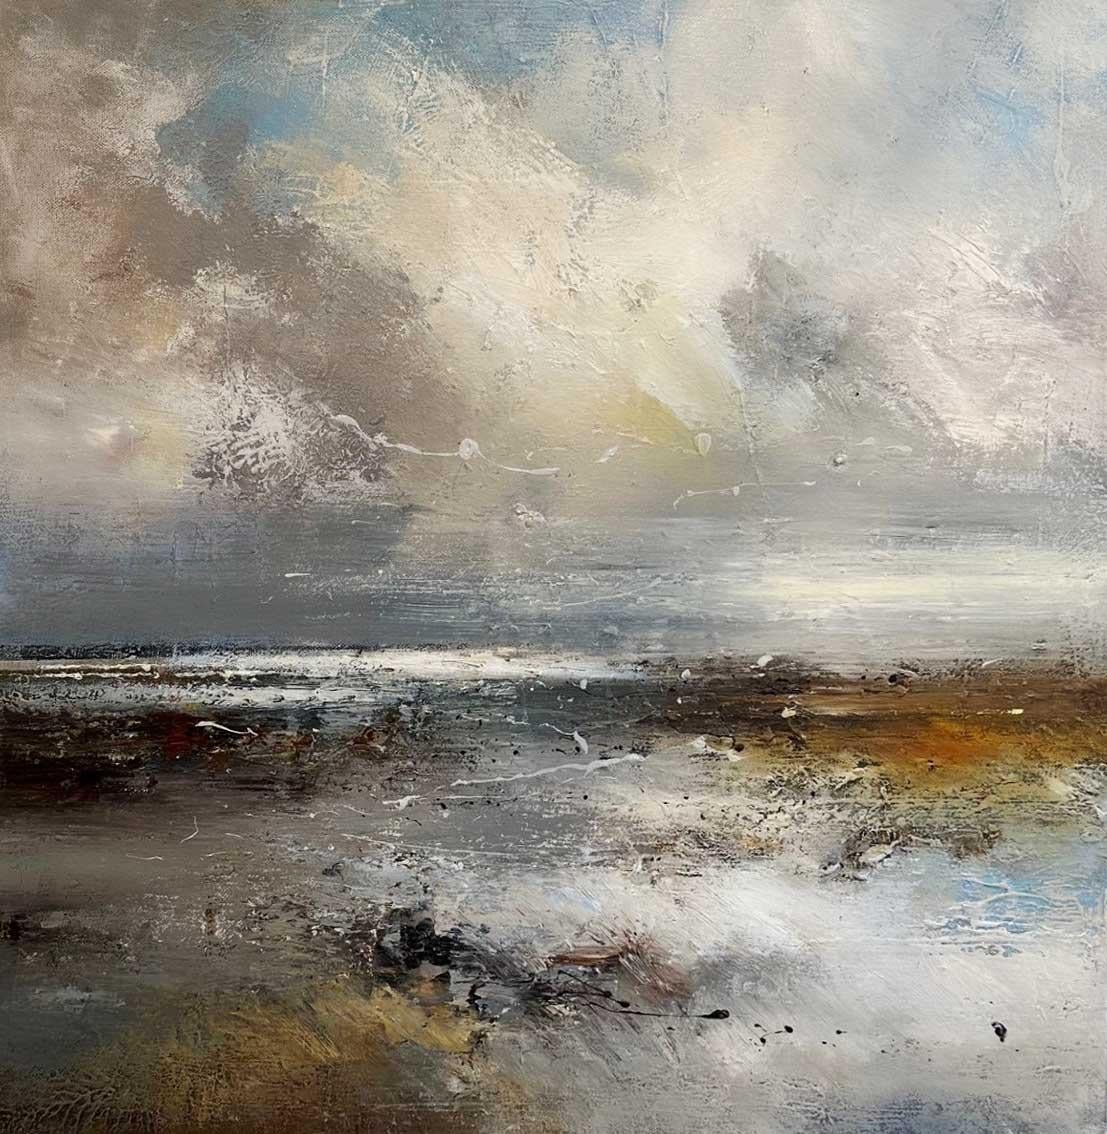 The multi award winning artist Claire Wiltsher was born in Wales and studied at both Lancashire and Northumbria Universities. Claire’s work has attracted critical acclaim. In 2010 the Society of Women Artists awarded Claire the ‘Rosemary and Co’